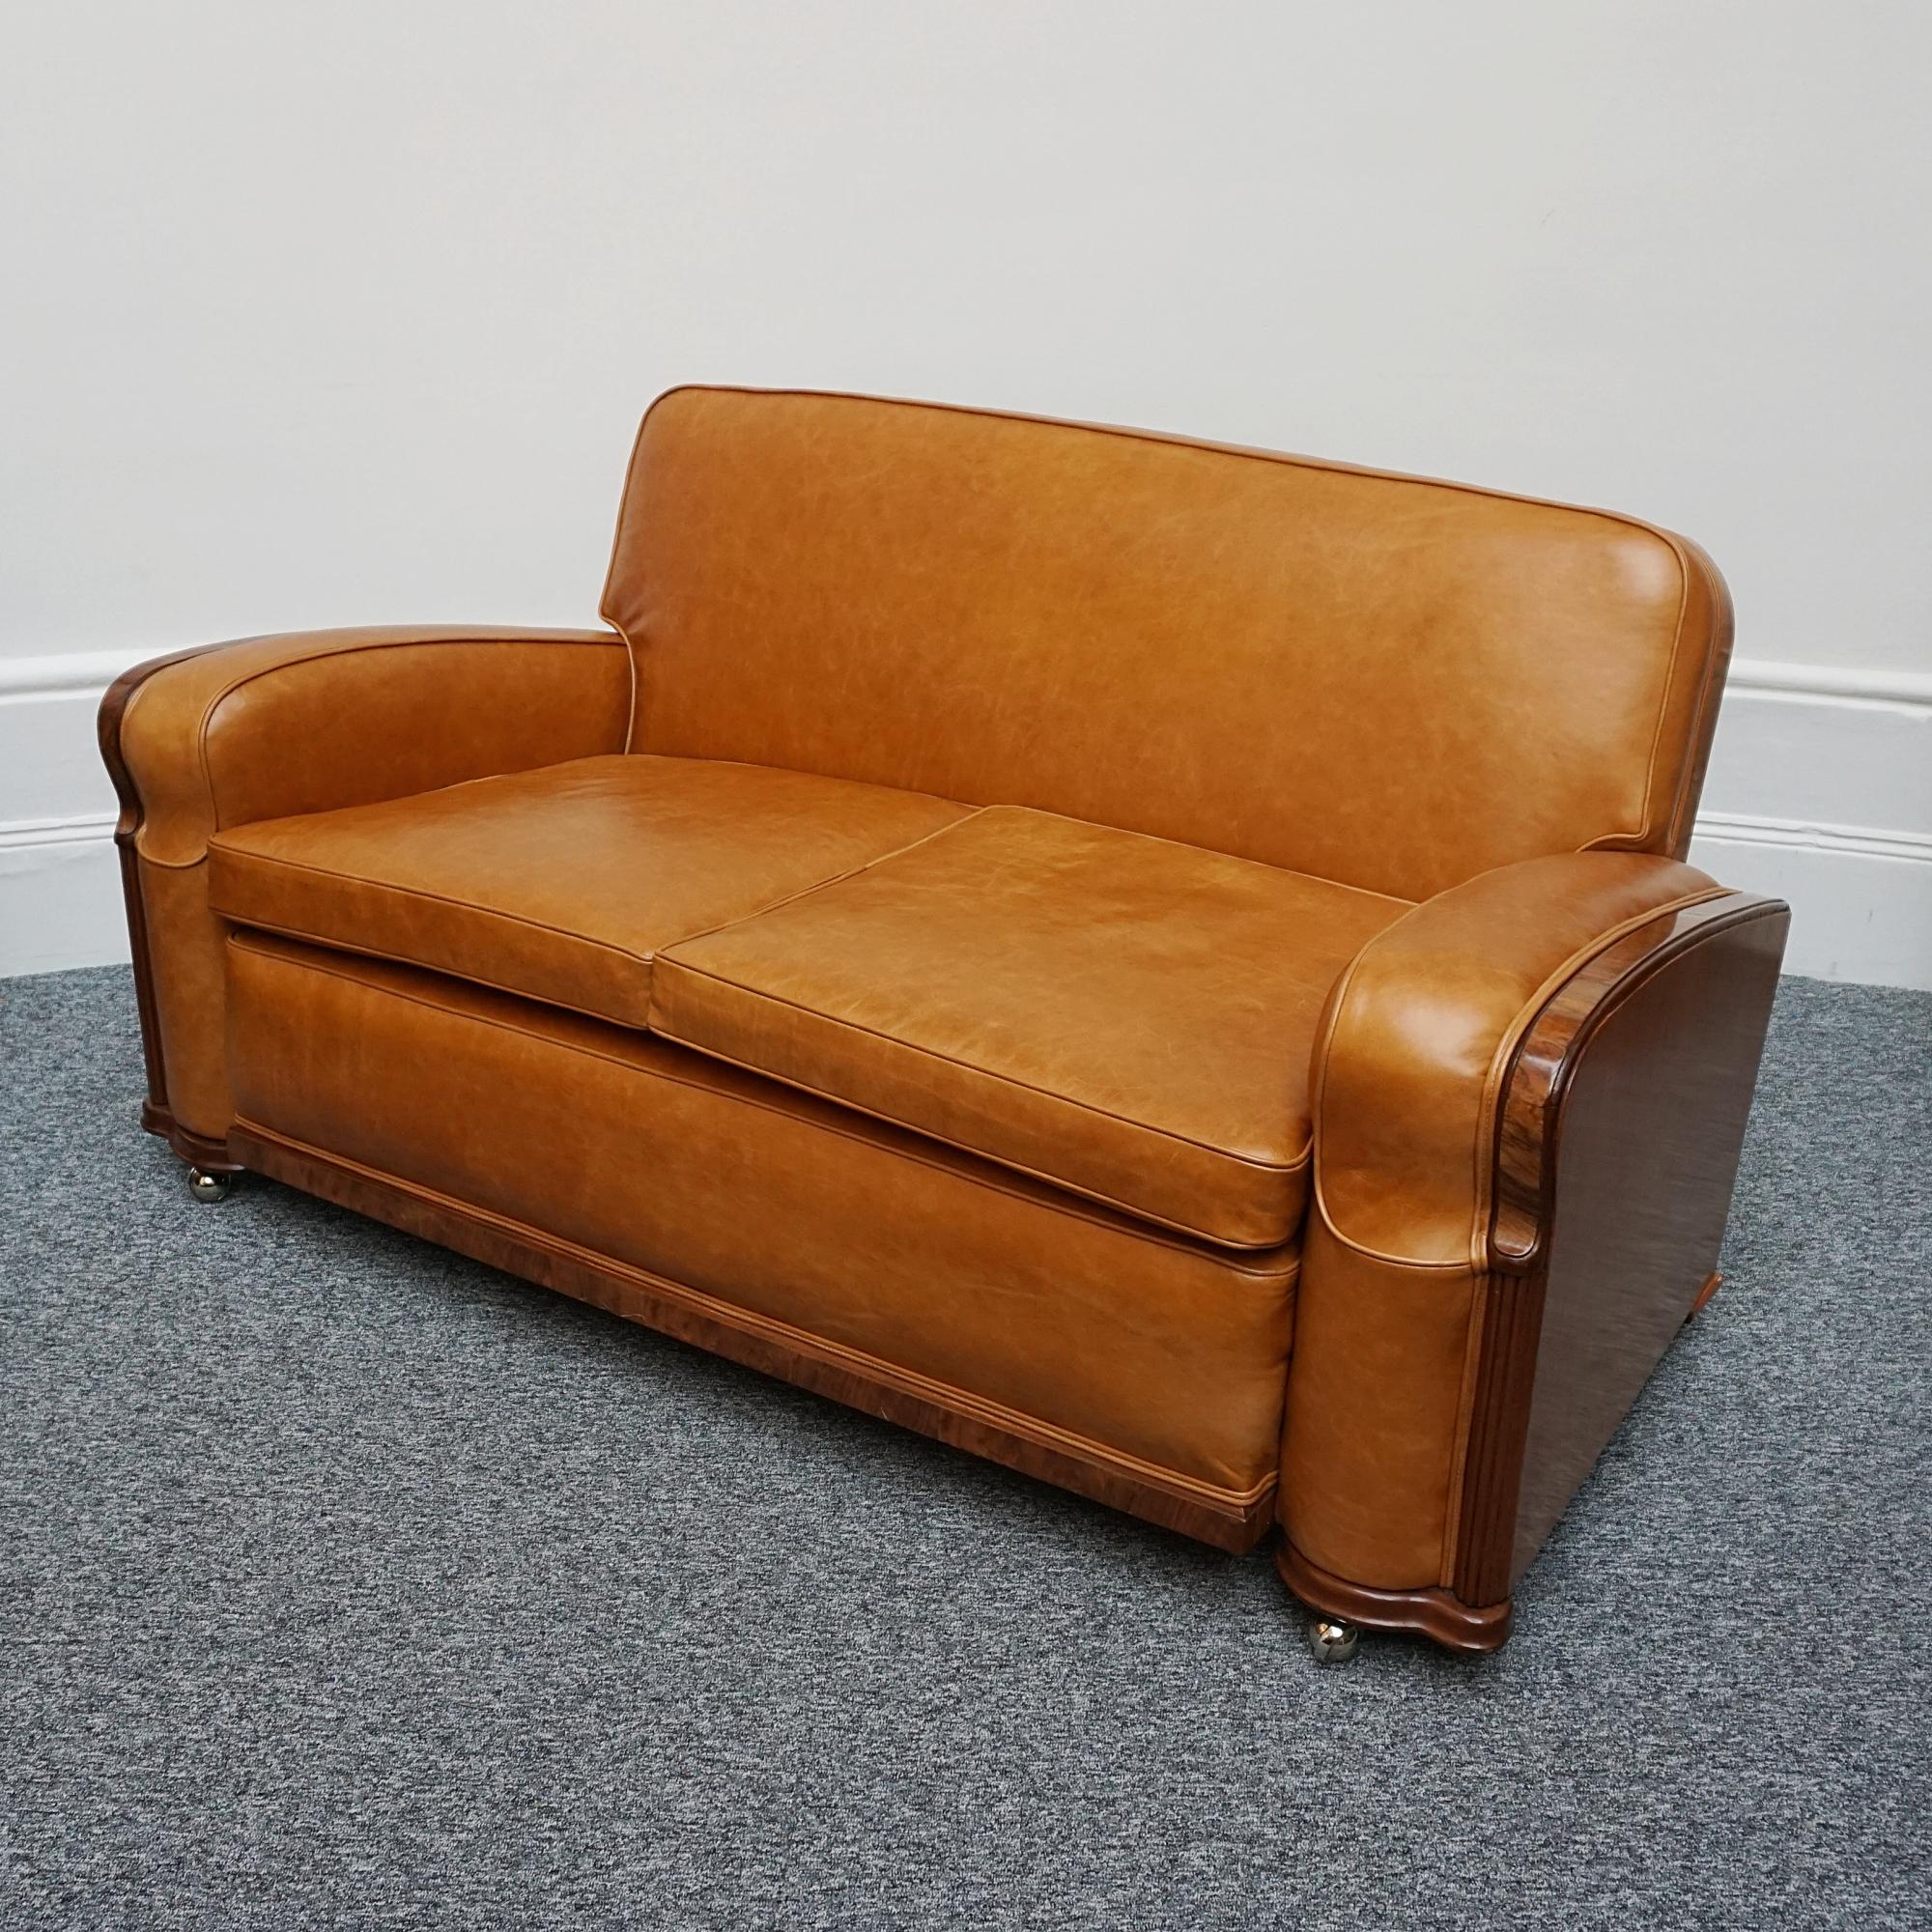 English An Original Art Deco Club Sofa with Brown Leather Re-Upholstery  For Sale